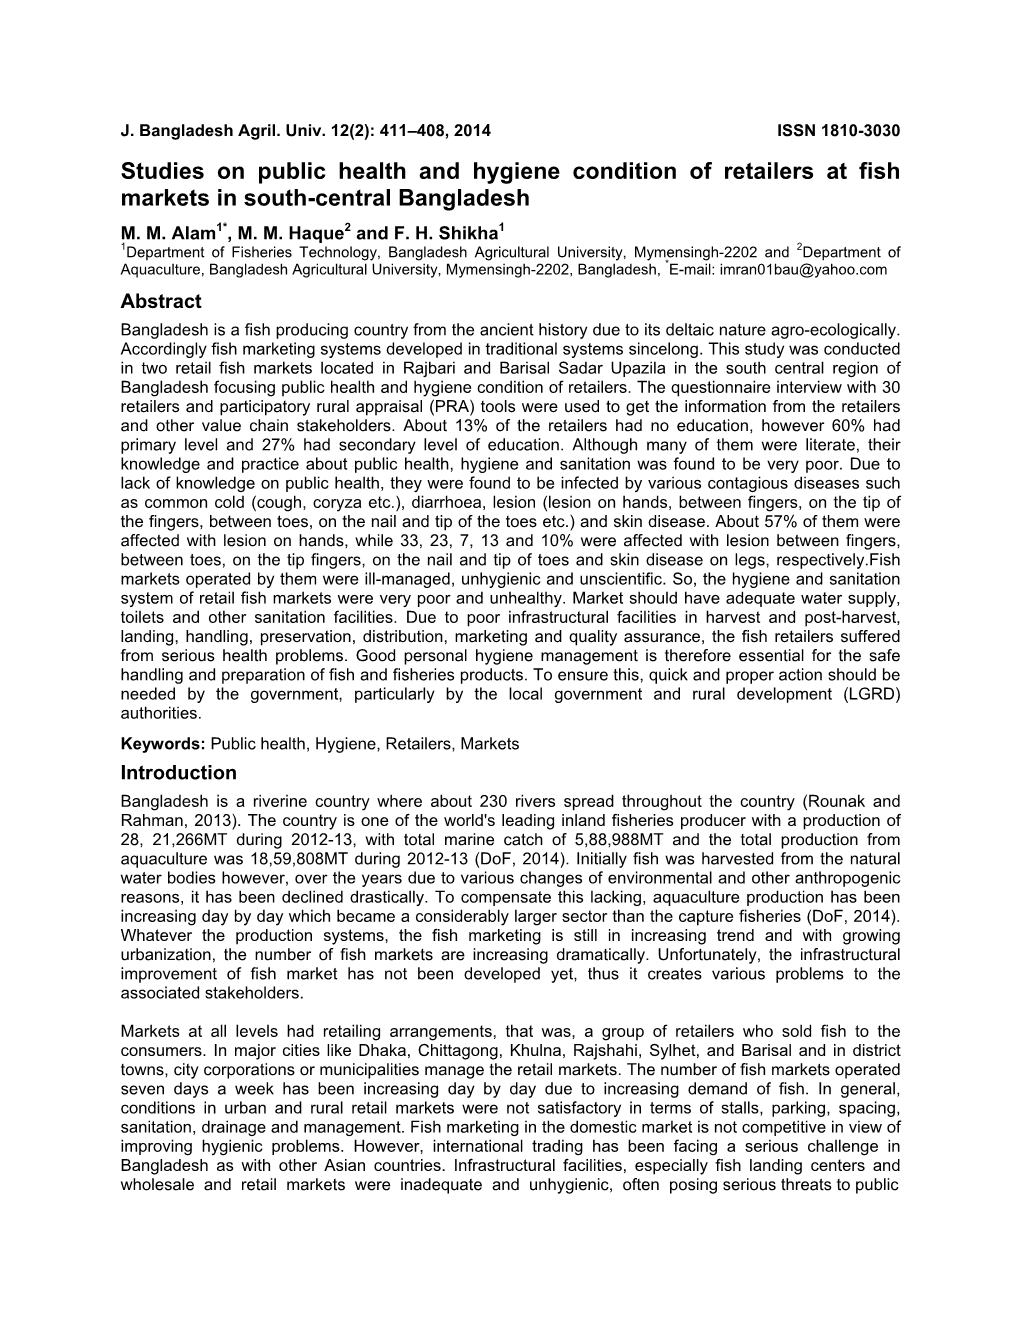 Studies on Public Health and Hygiene Condition of Retailers at Fish Markets in South-Central Bangladesh